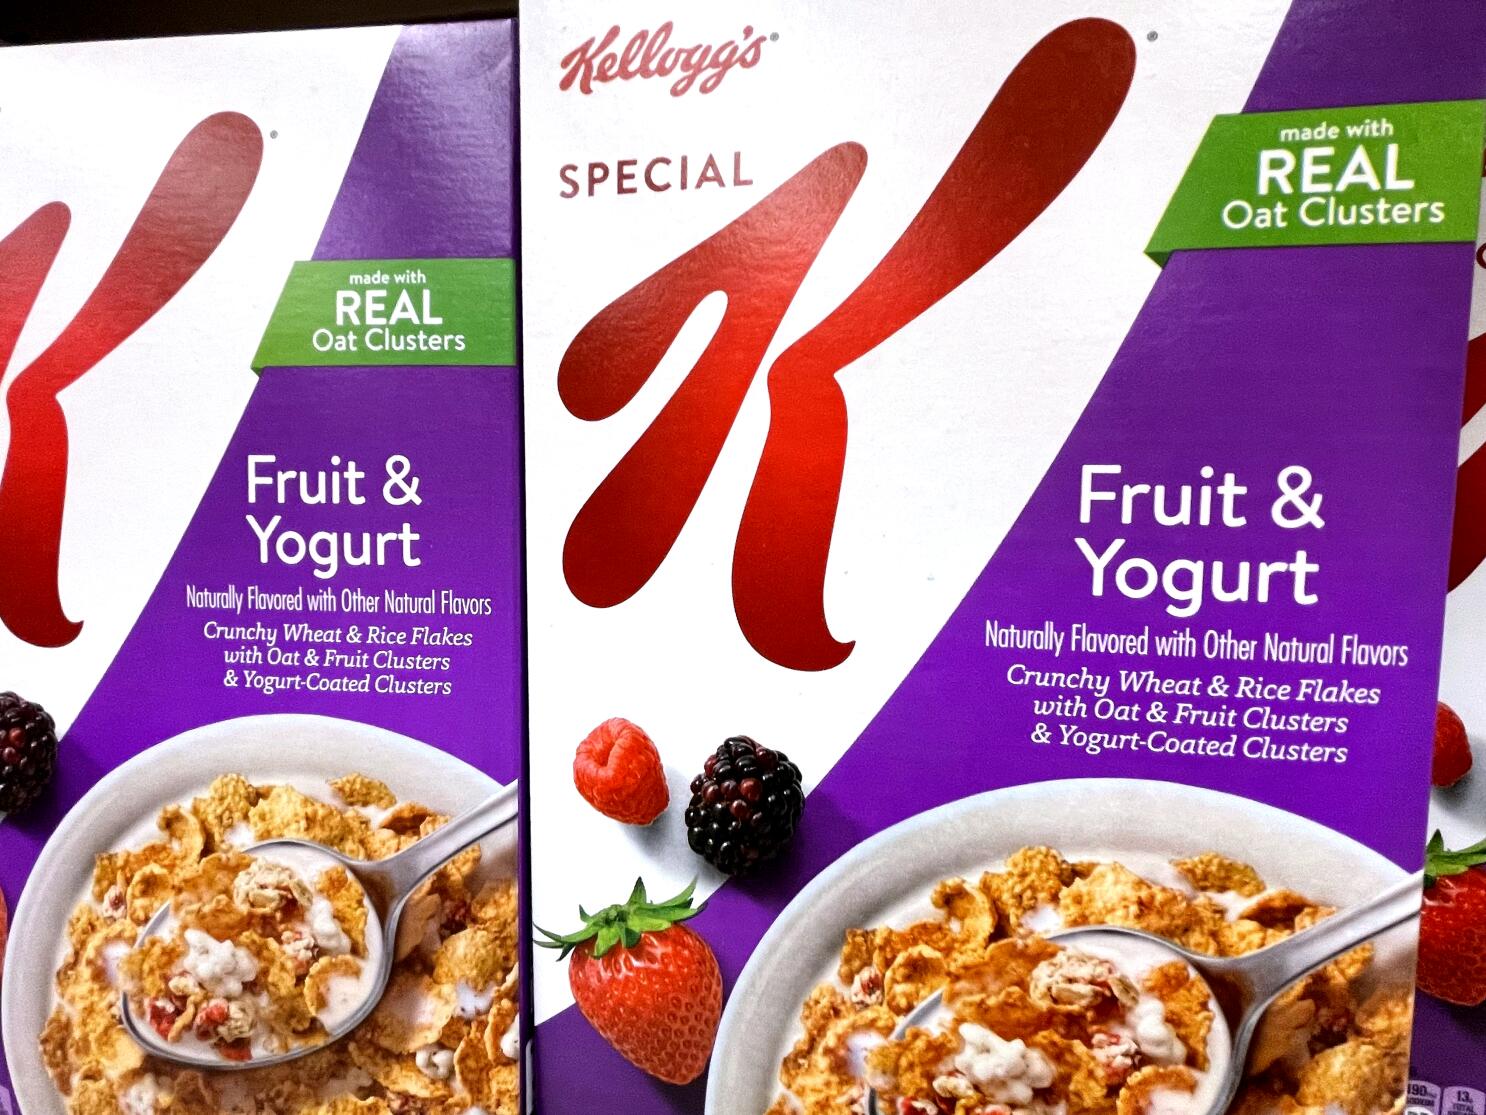 Kellogg's Special K, Worldwide delivery